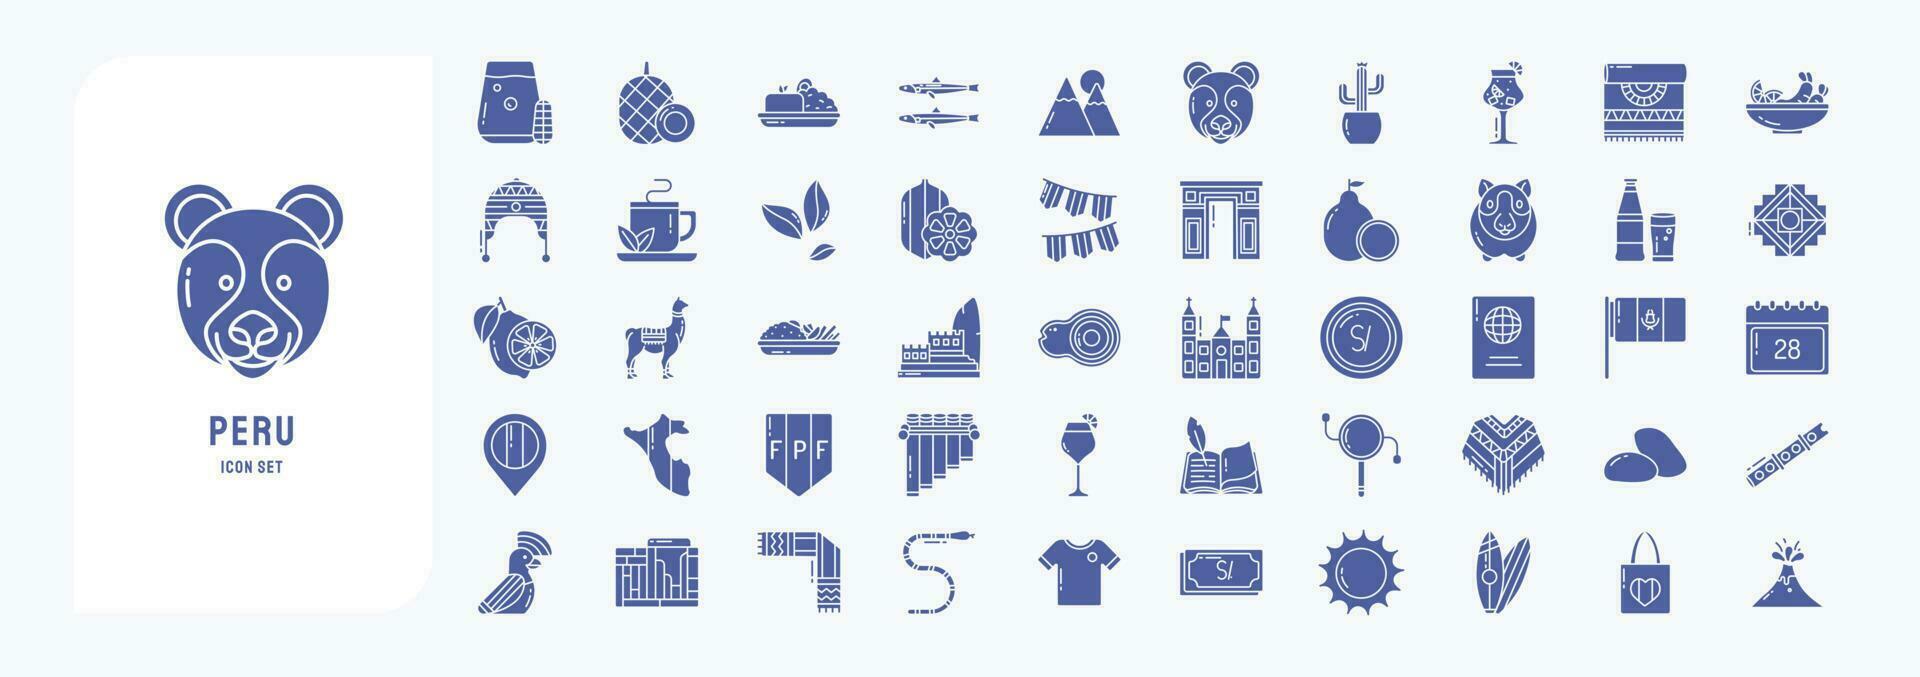 Collection of icons related to Peru, including icons like Anchovy, Bear, Cactus, Cocoa, Guinea Pig and more vector